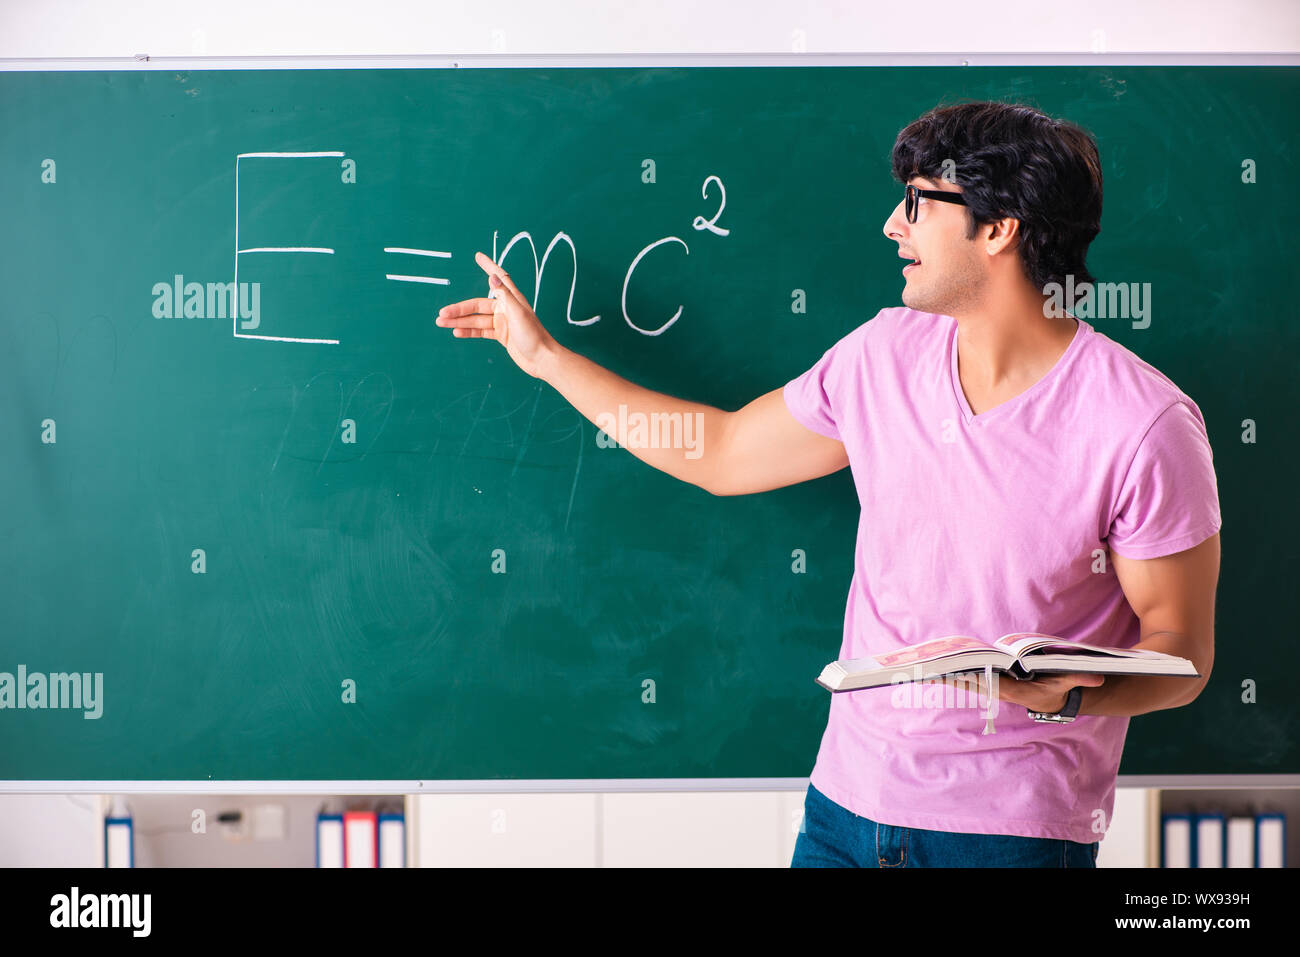 Young male physic standing in front of the green board Stock Photo